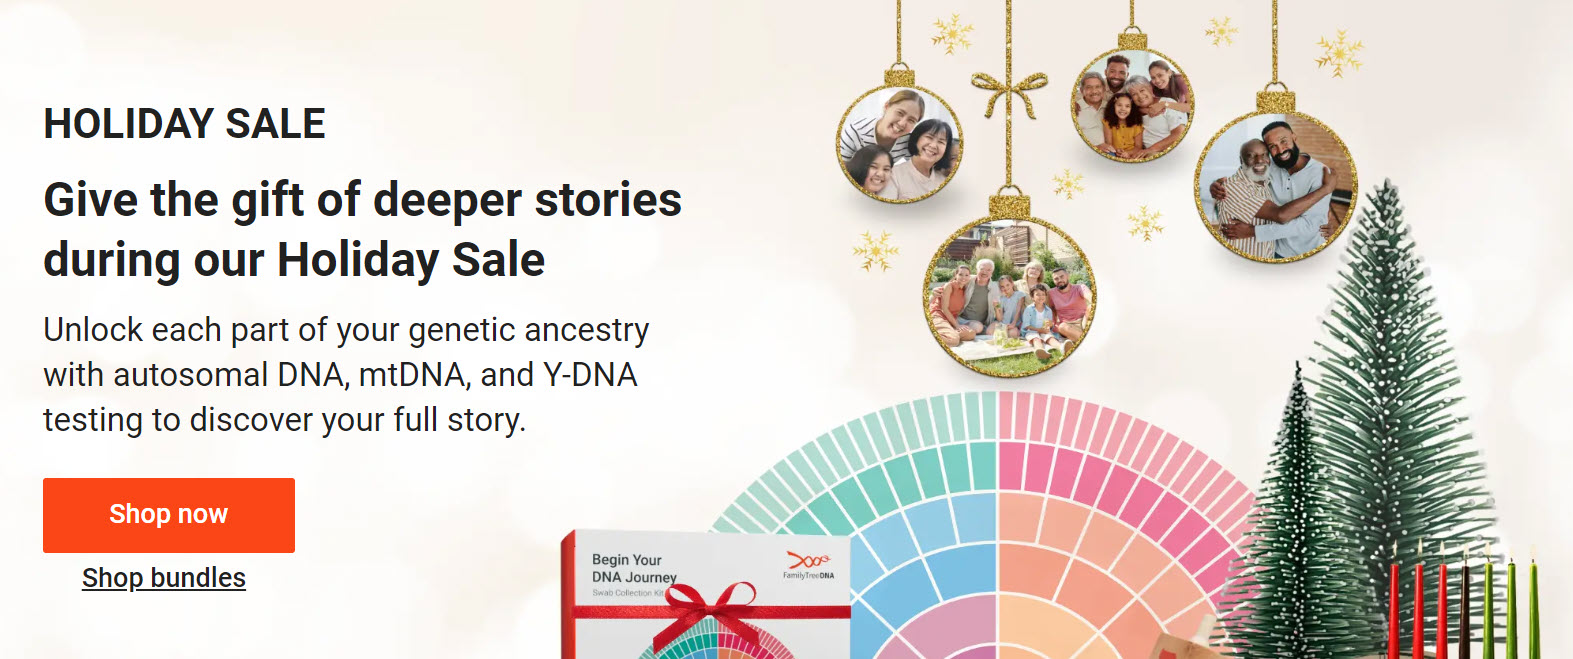 Best Holiday DNA Sales: FamilyTreeDNA Holiday Sale - Amazing Savings on ALL DNA Test Kits!